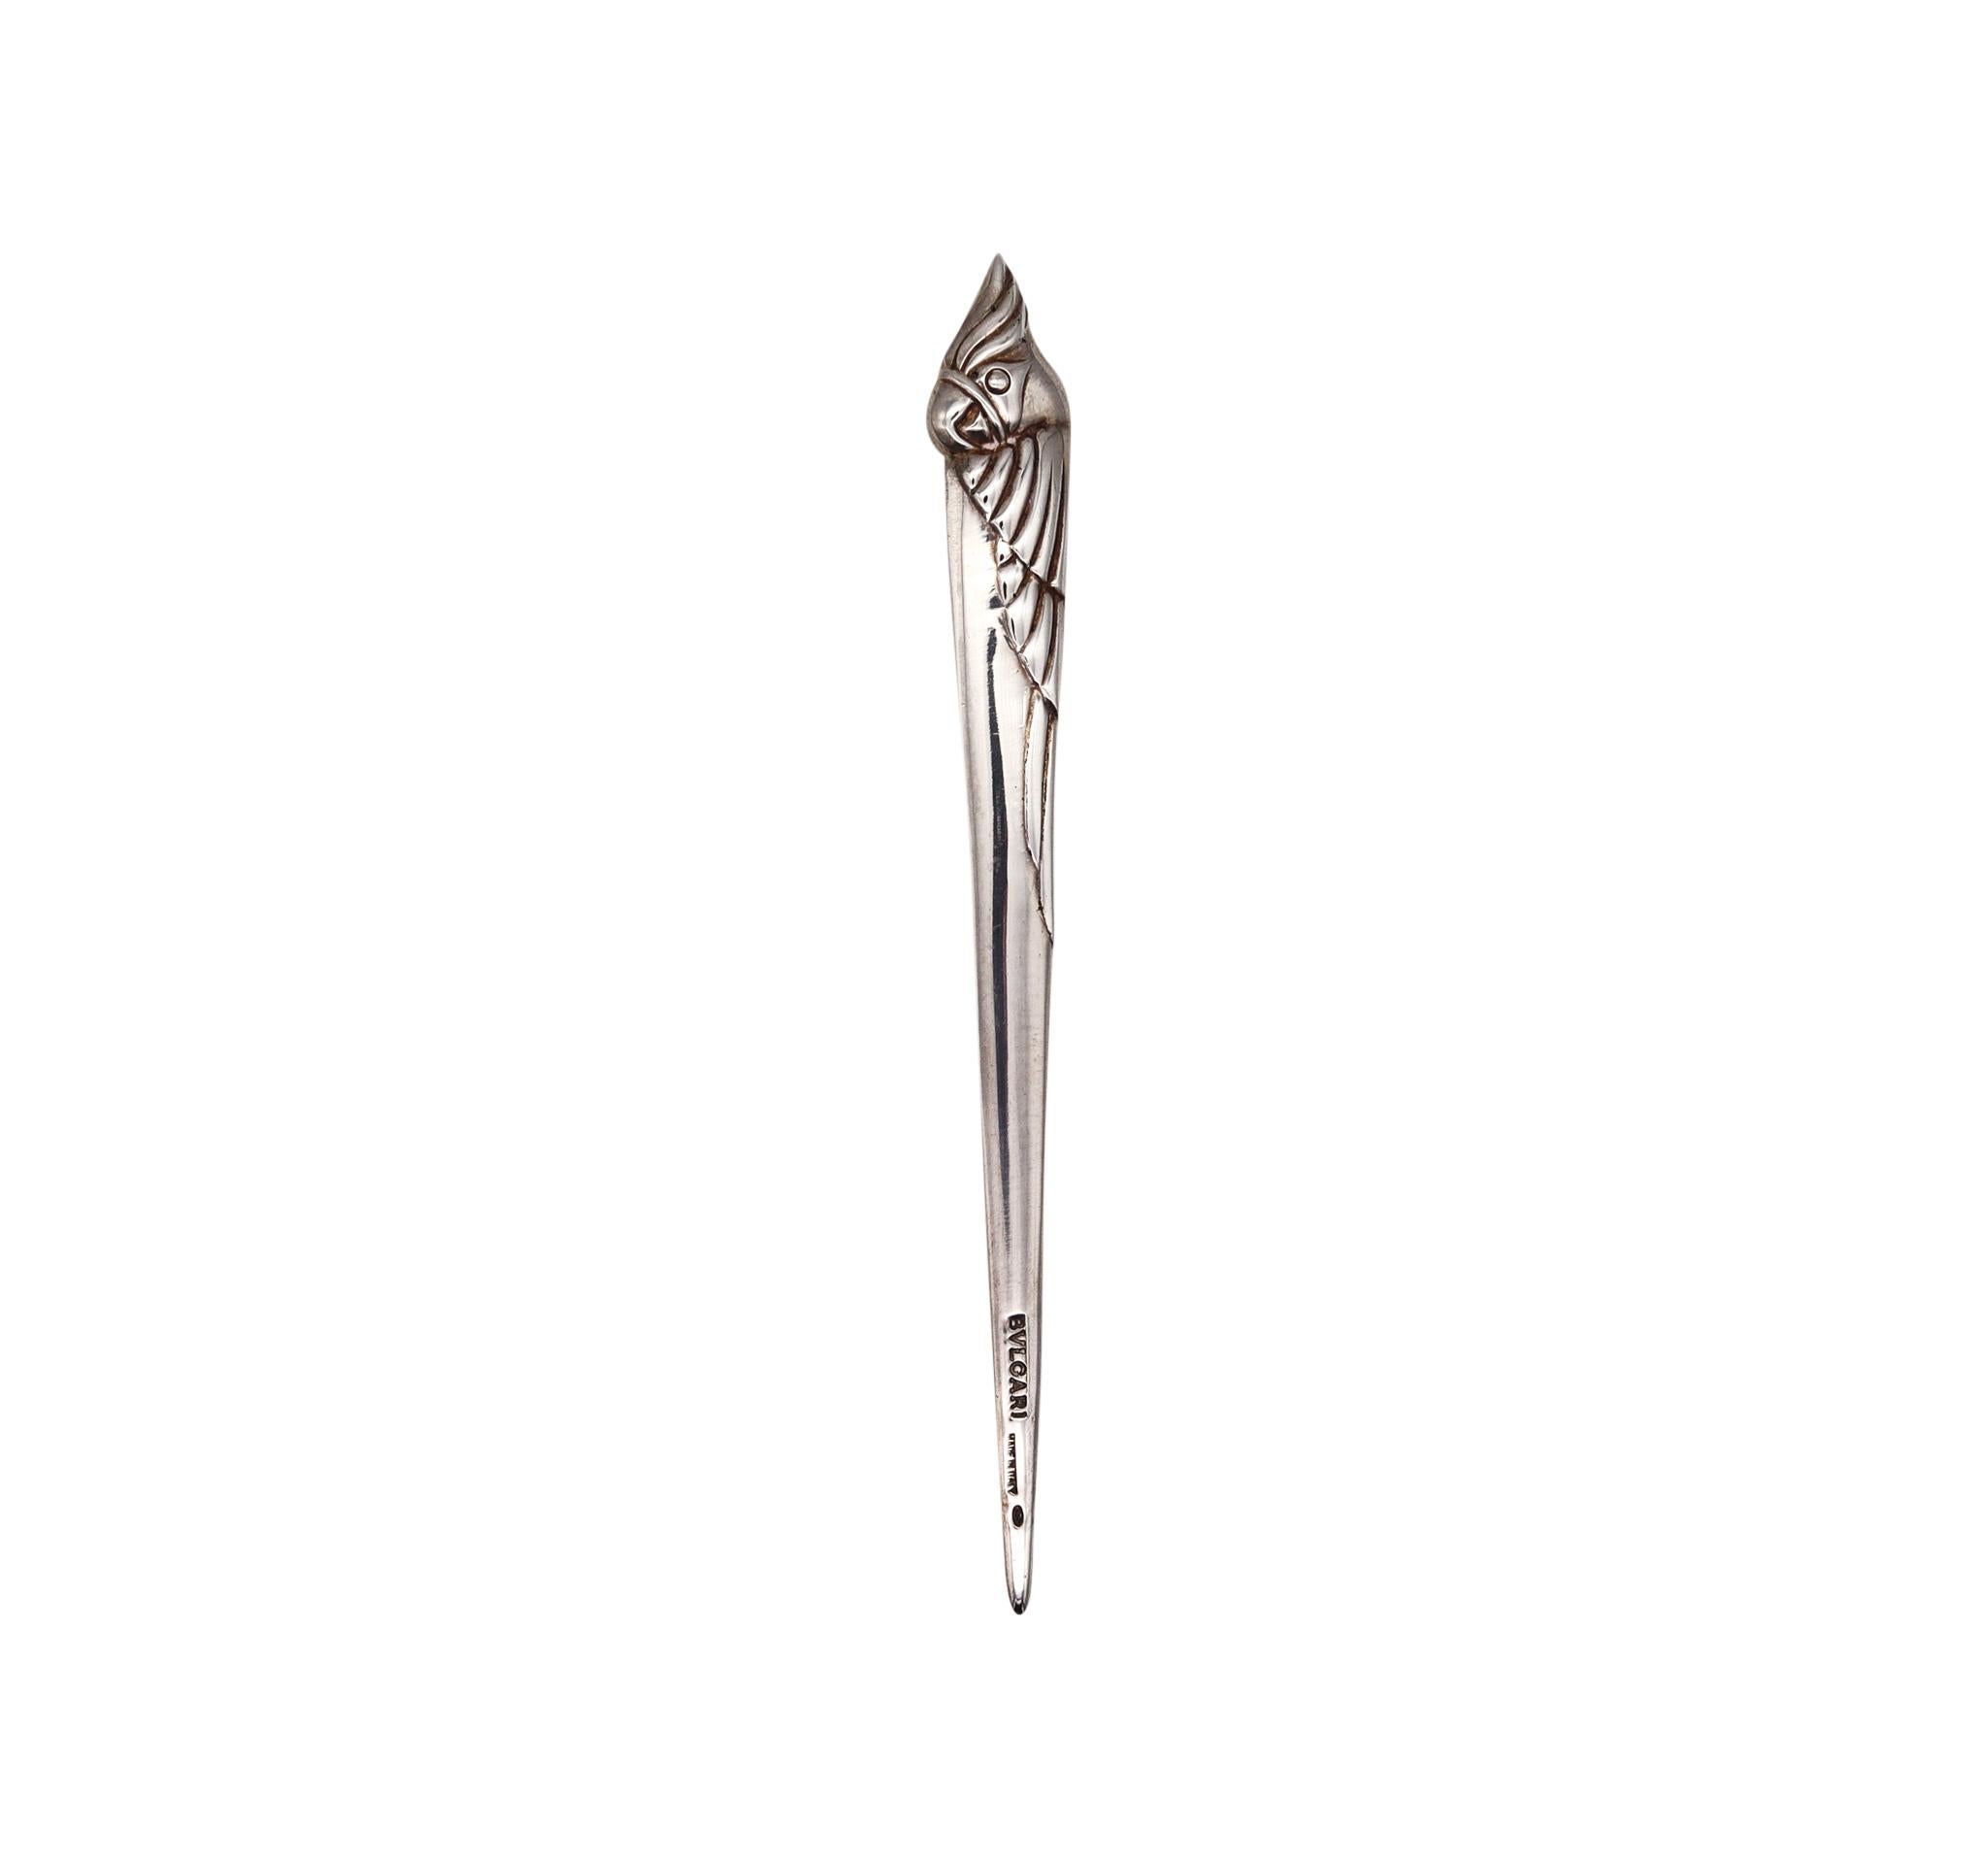 Late 20th Century Bvlgari Roma 1970s Vintage Parrot Bird Letter Opener in .925 Sterling Silver